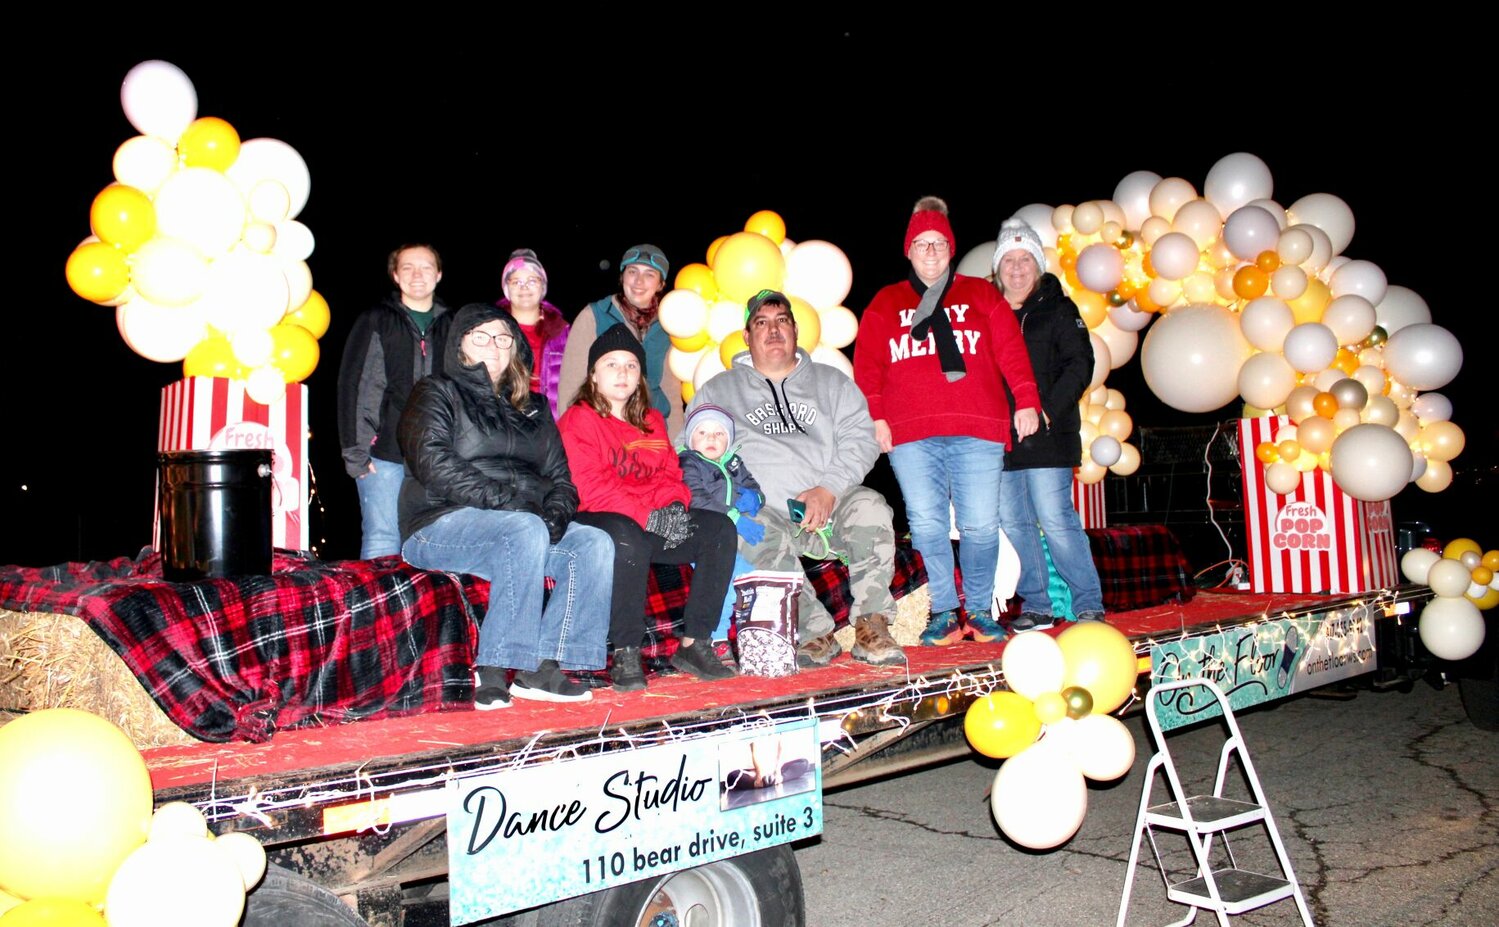 "Christmas at the Movies" was well-represented by this first-prize-winning float entered by Bear Crossing Truck Wash and Tire Center, Coastal-FMC and On the Floor Dance Studio. It features oversized popcorn containers, balloon arches and a snow machine. The parade, held Saturday, was organized by the Willow Springs Chamber of Commerce.